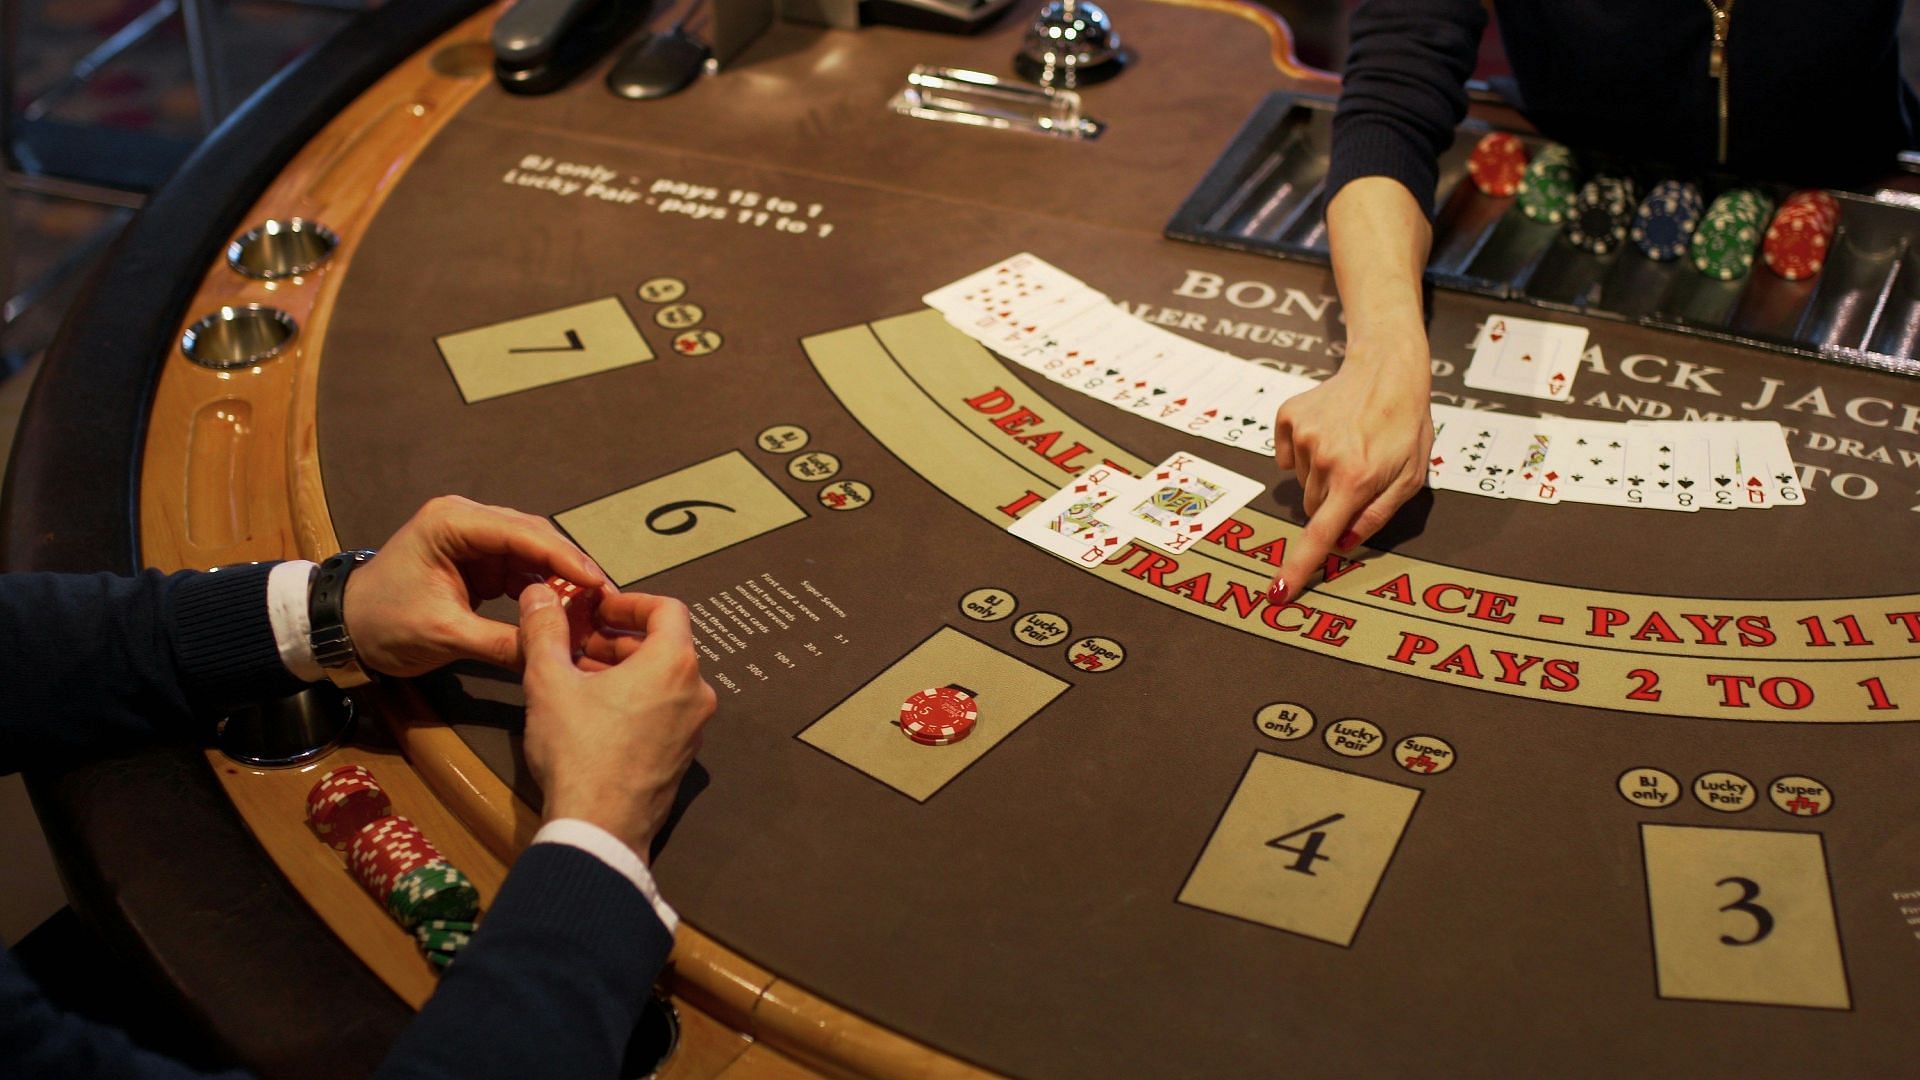 What is a gambling addiction? (Image by Aidan Howe/Unsplash)